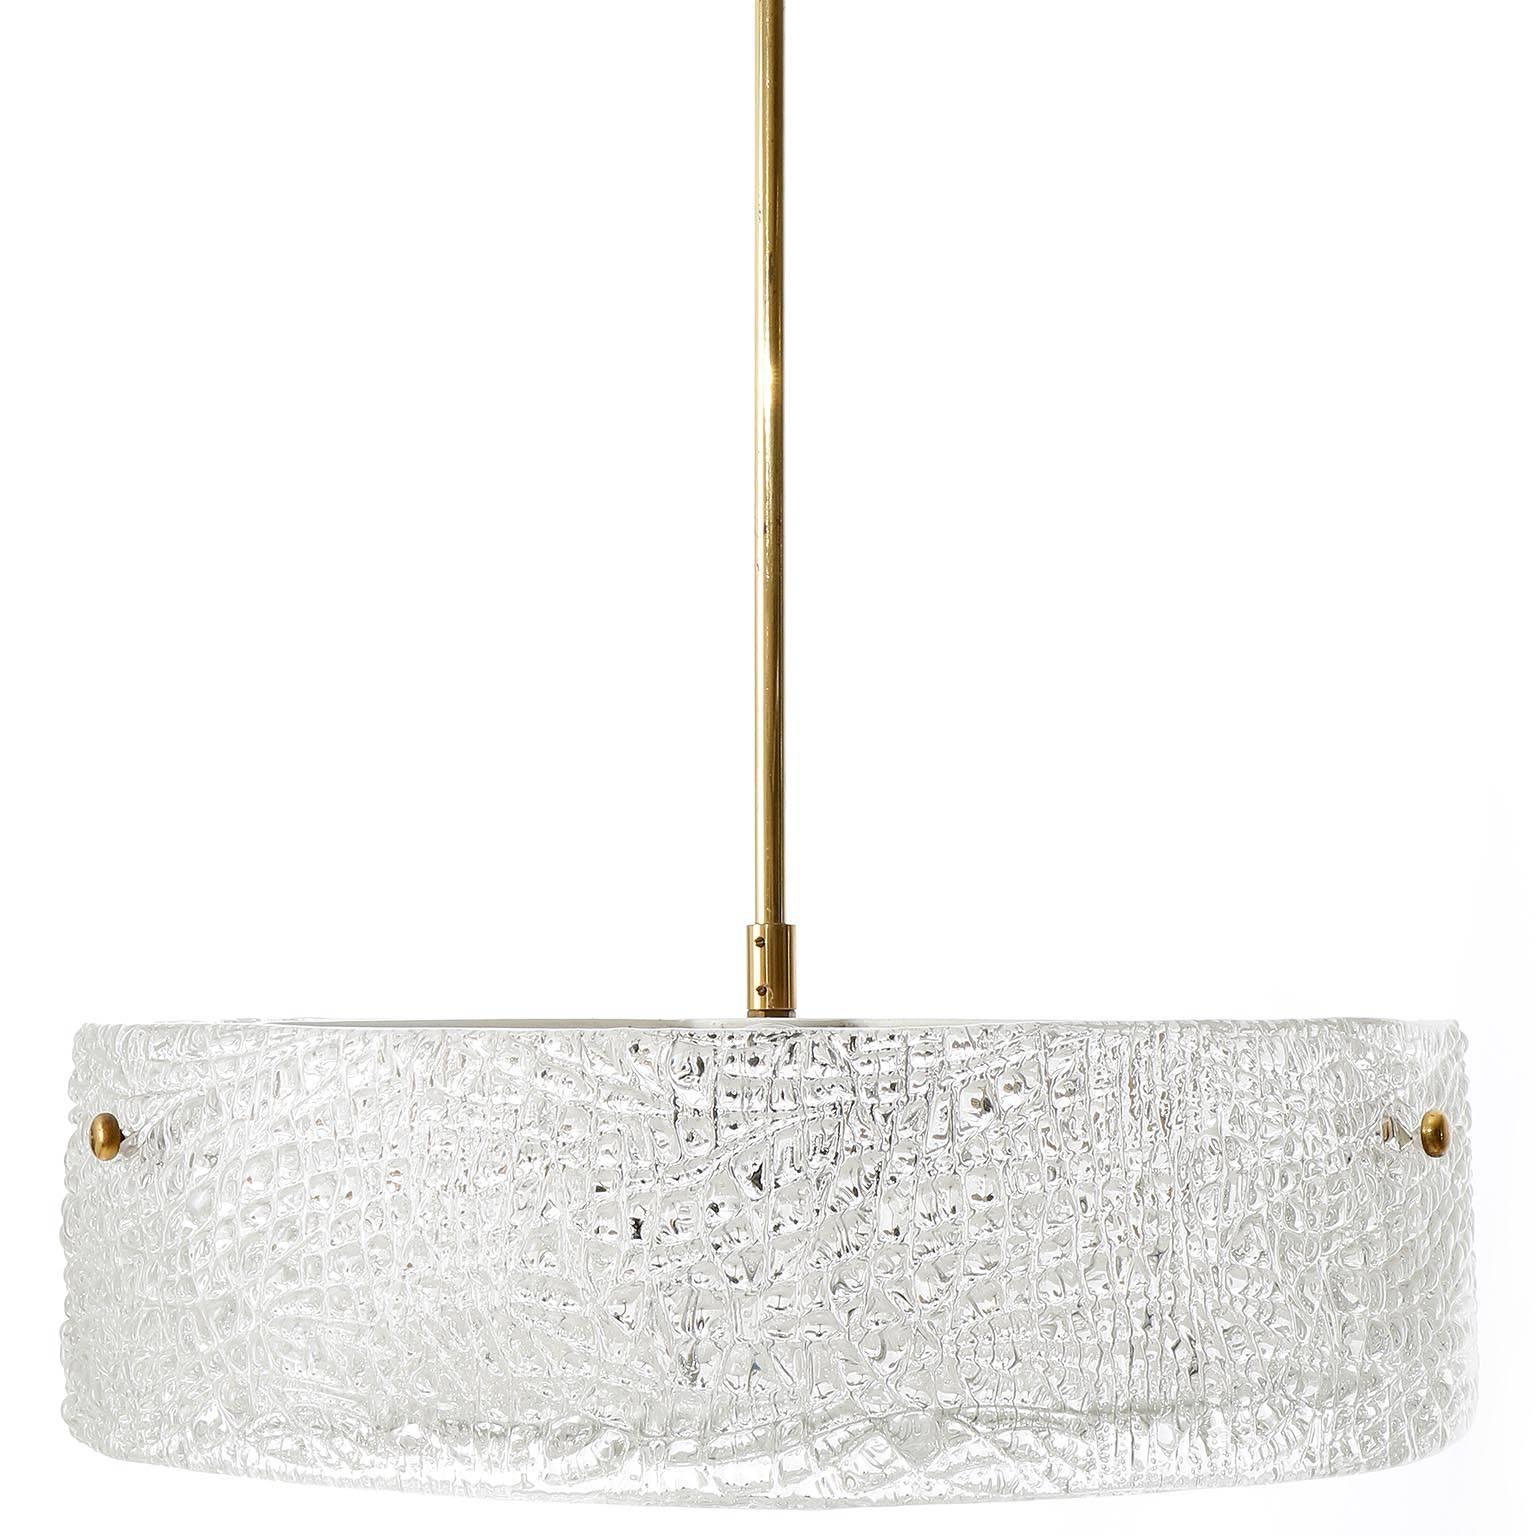 One of two beautiful textured glass and brass lamps by J.T. Kalmar, Vienna, manufactured in midcentury, circa 1960 (late 1950s or early 1960s). 
A round glass ring is mounted with three brass bolts on a white enameled metal frame. A textured glass